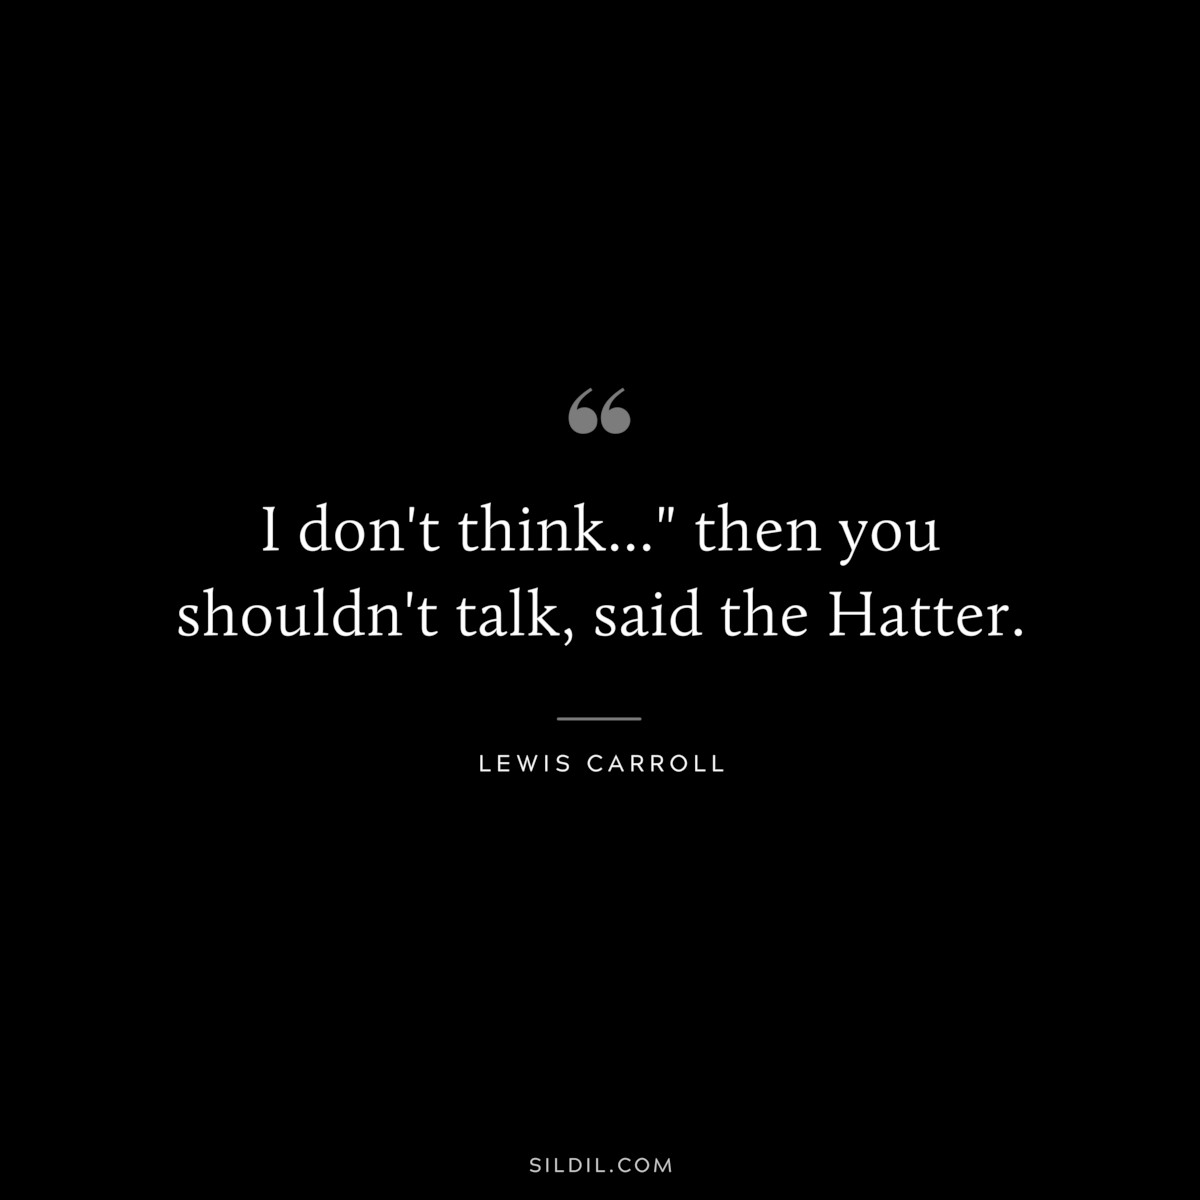 I don't think..." then you shouldn't talk, said the Hatter.